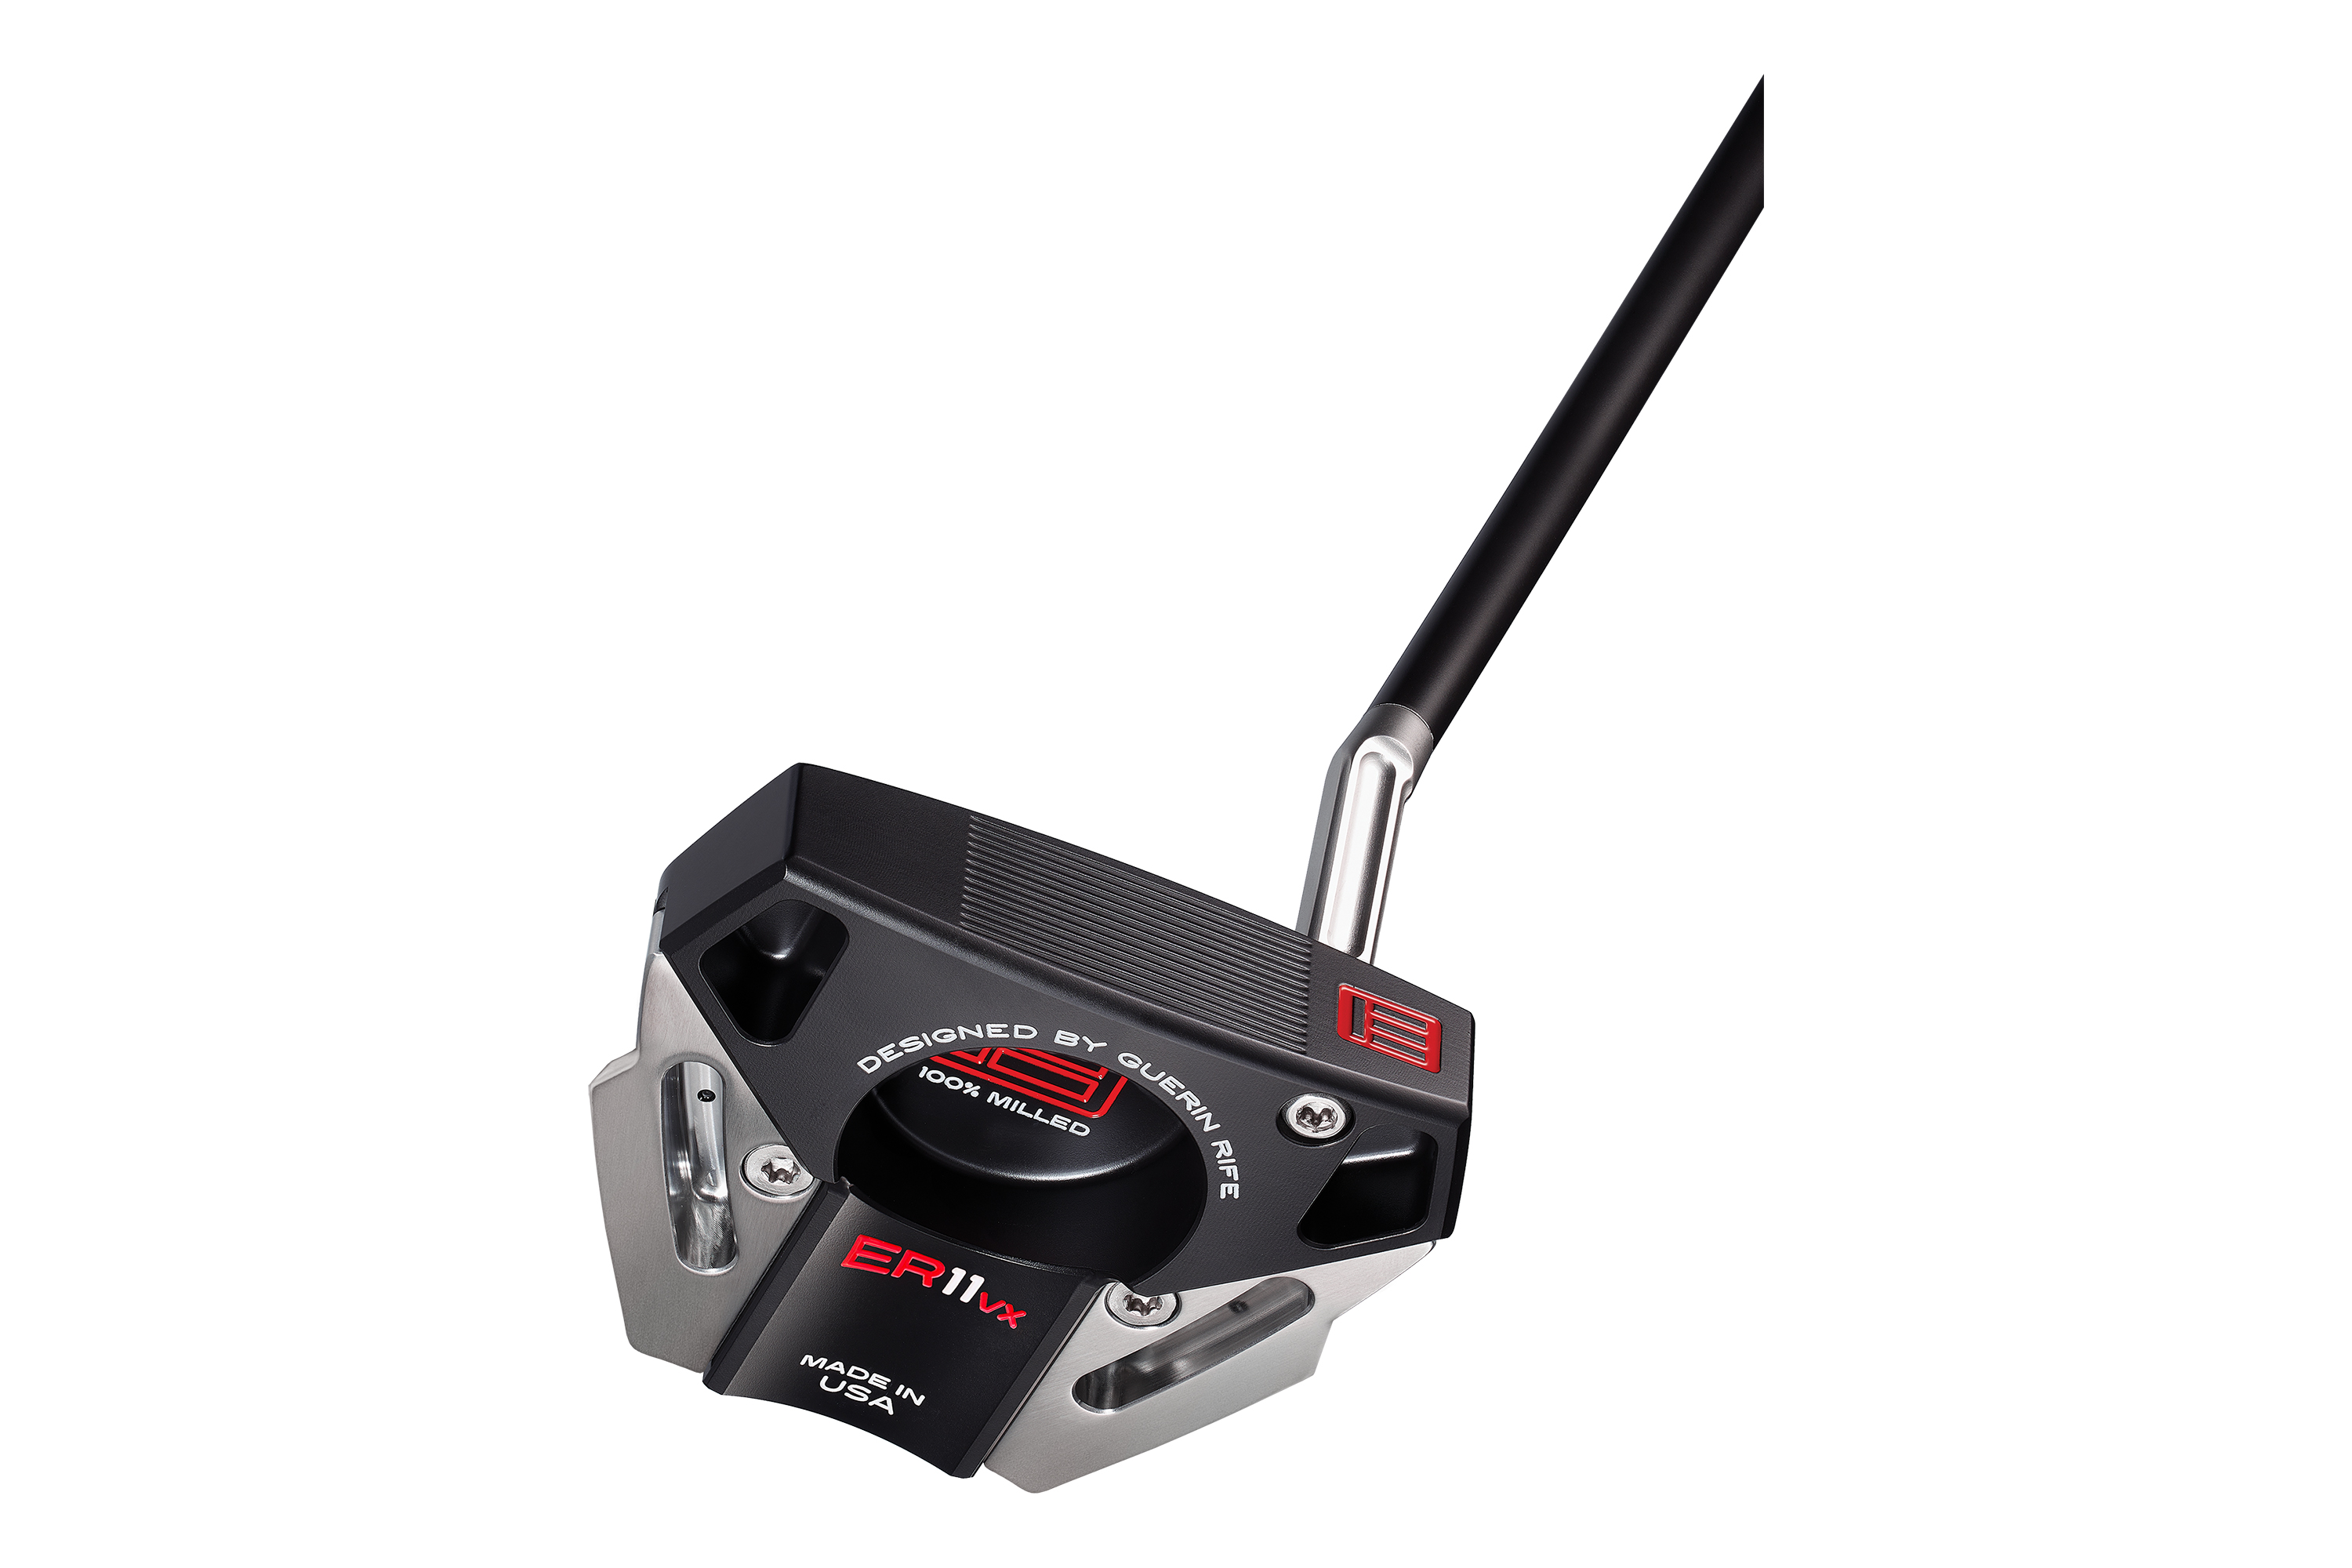 Evnroll ER11vx, Zero putters: What you need to know | Golf Equipment ...